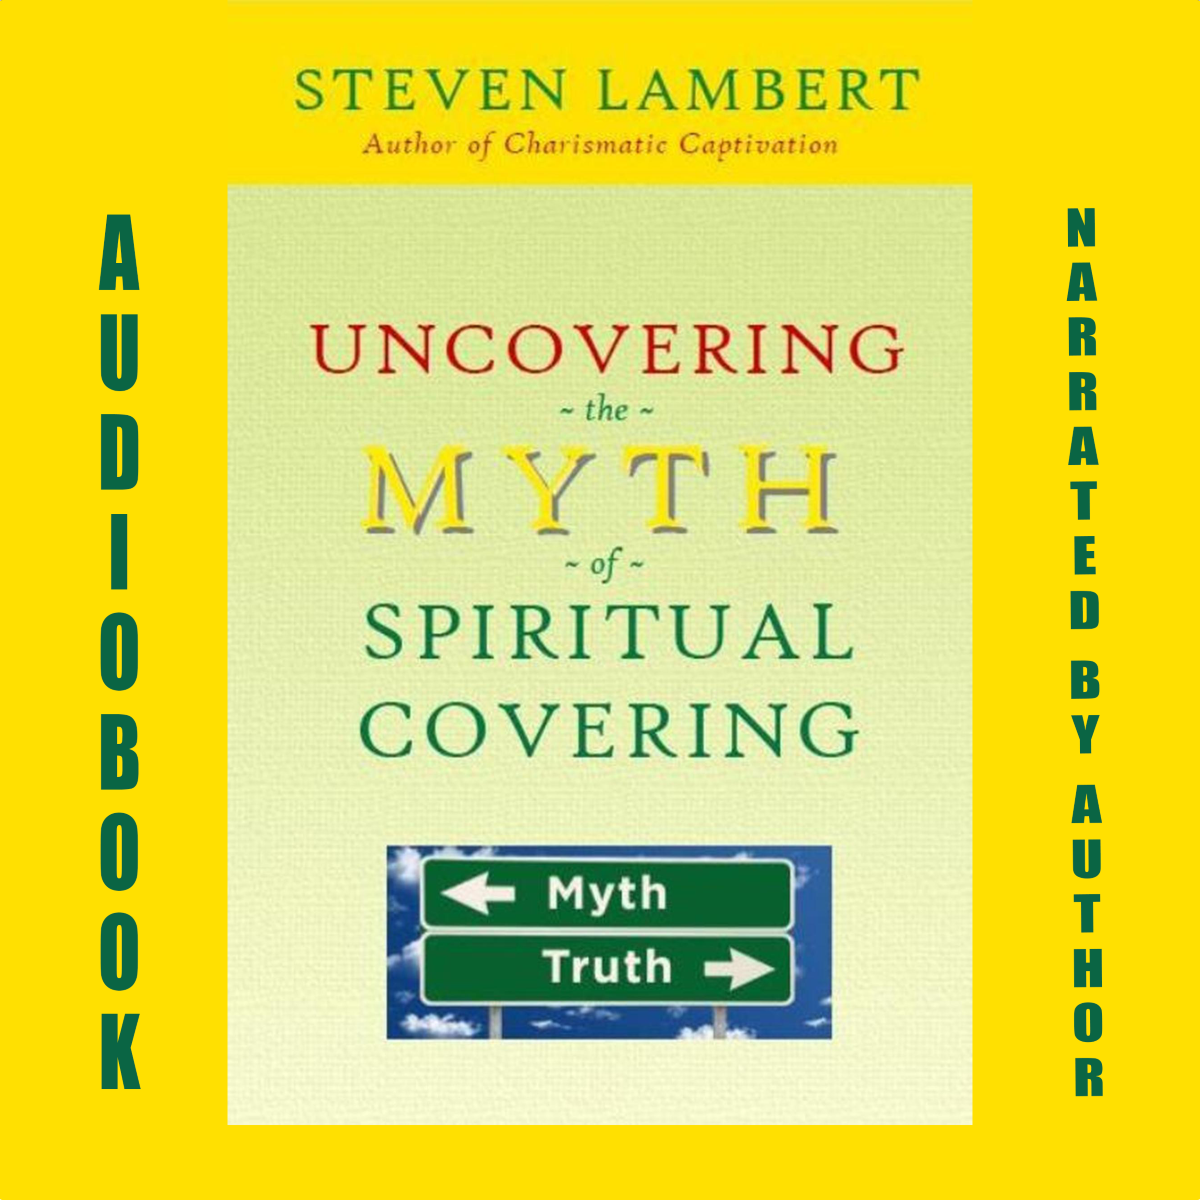 Uncovering the Myth of Spiritual Covering Audiobook Cover